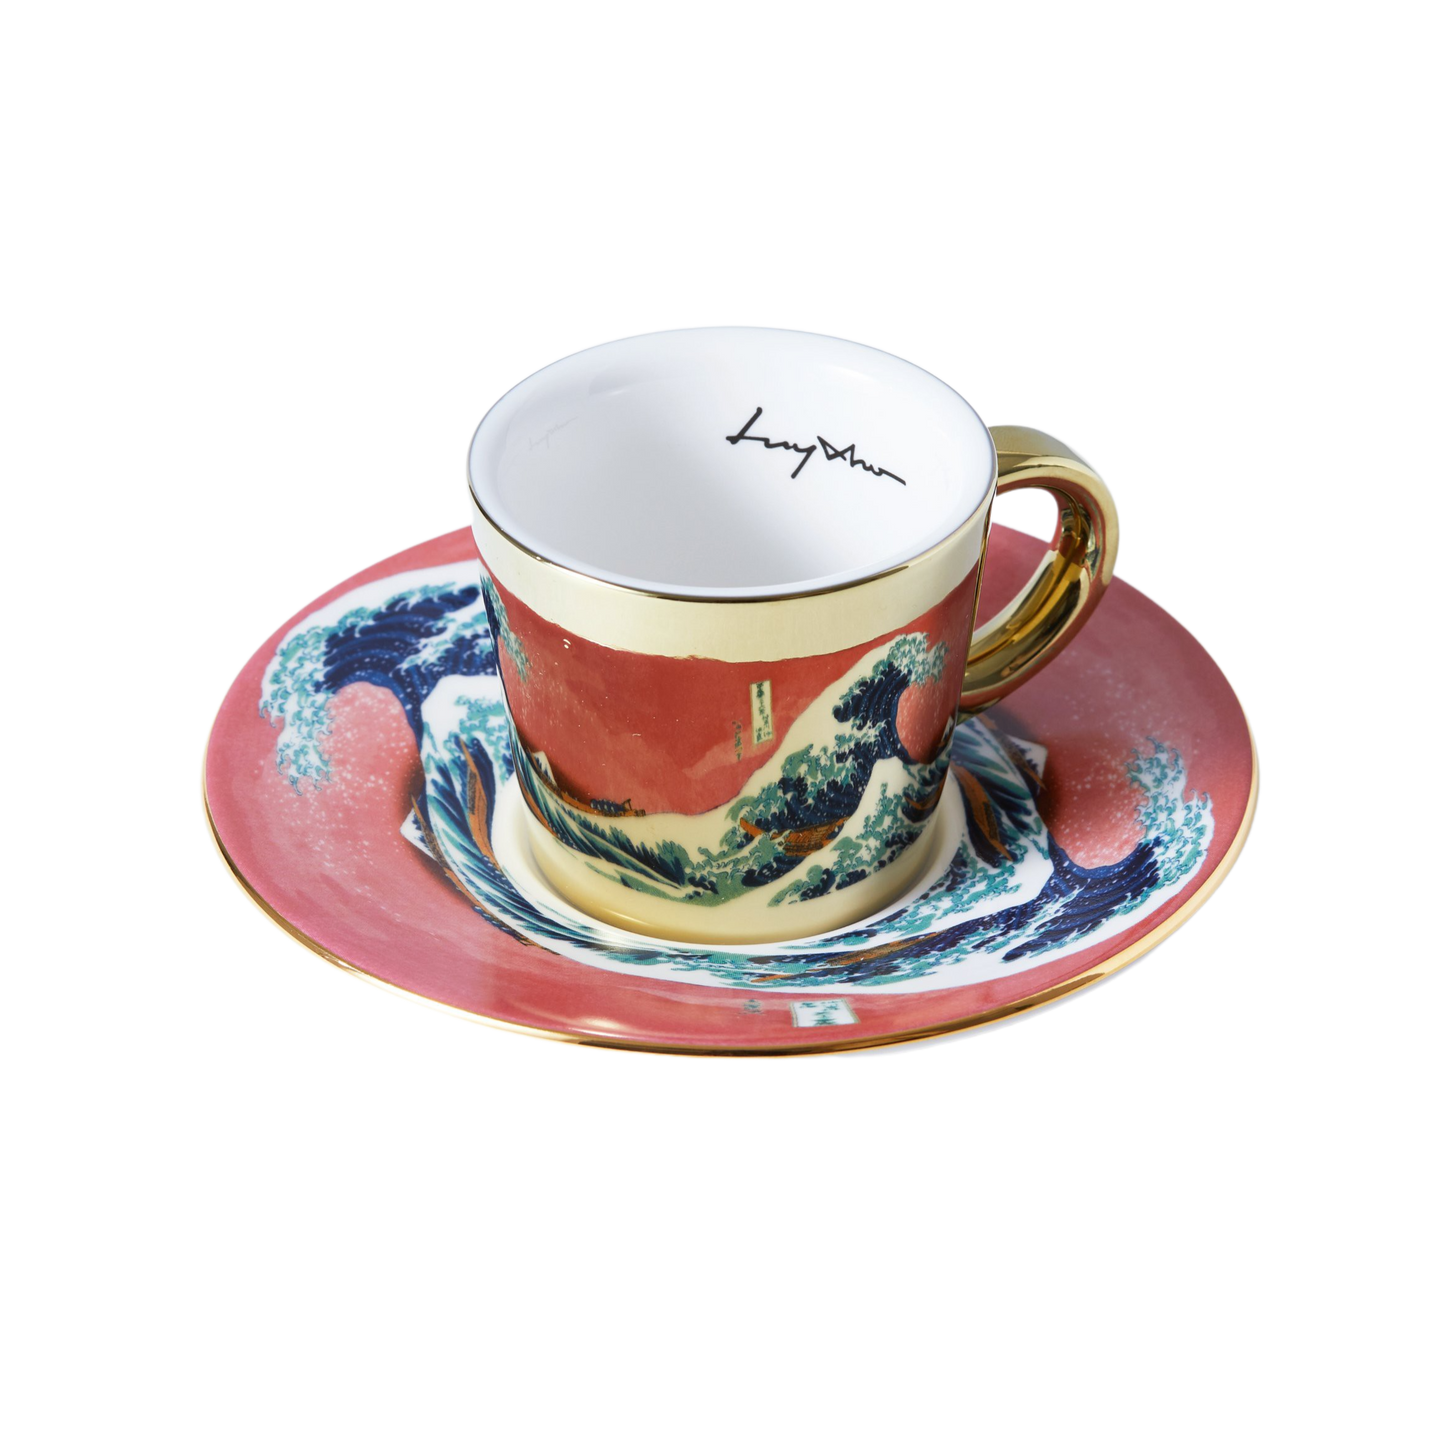 [2022 CAST] LUYCHO Hommage Series The Great Wave off Kanagawa (Espresso Cup 80ml)